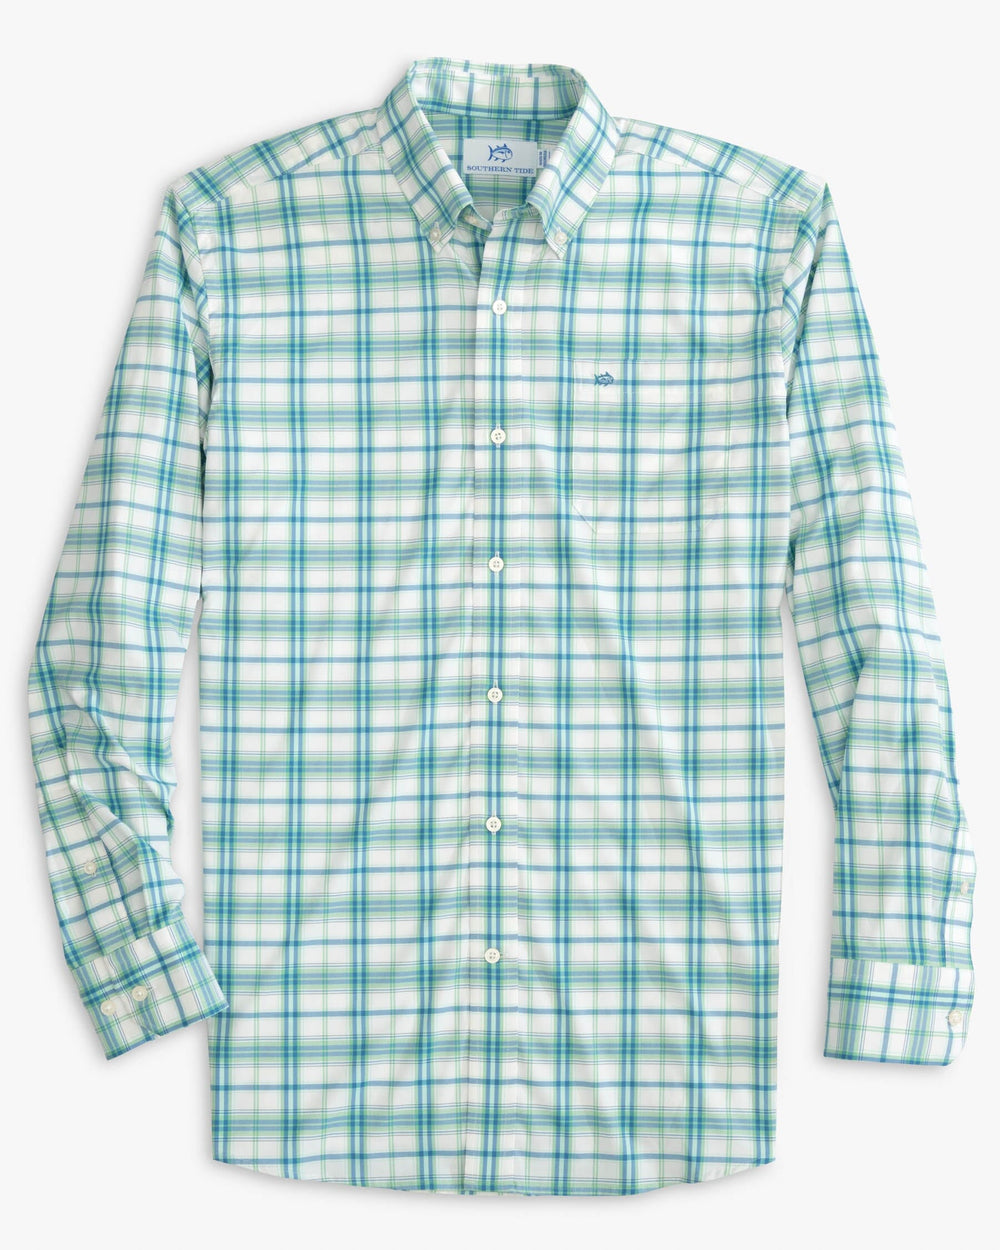 The front view of the Southern Tide Sapelo Plaid Intercoastal Sport Shirt by Southern Tide - Neptune Green